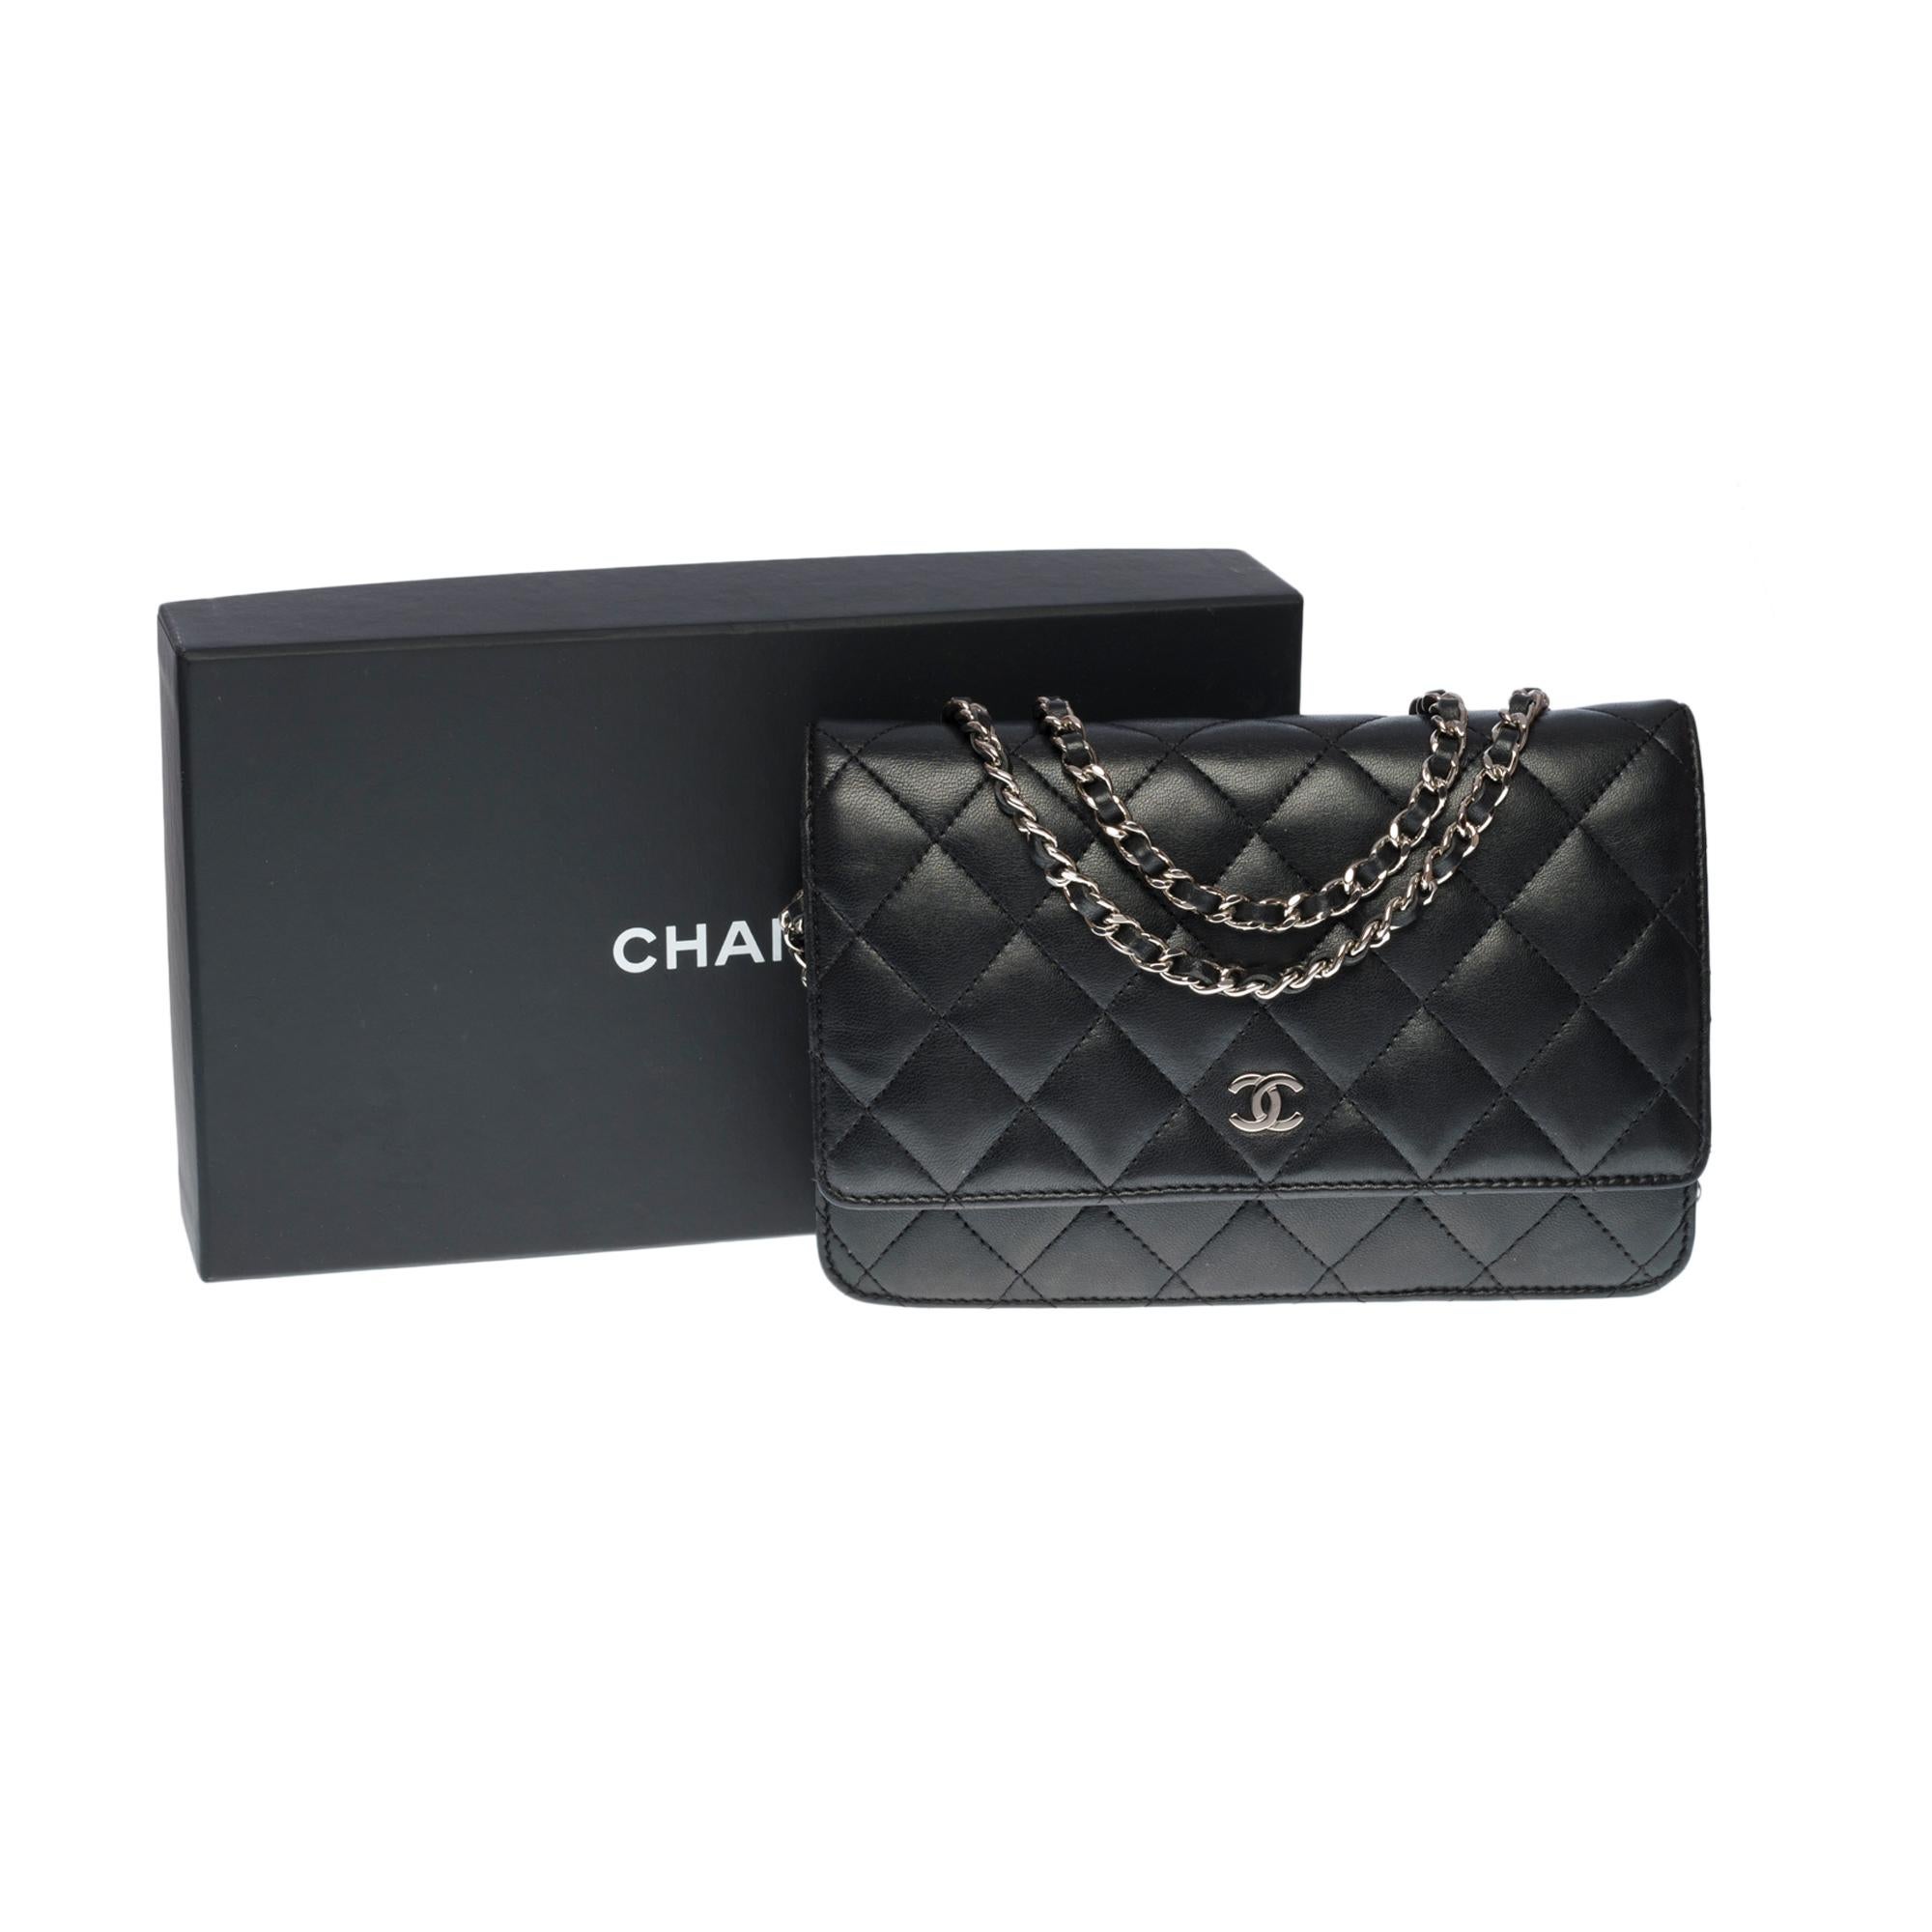 Chanel Wallet on Chain (WOC)  shoulder bag in black quilted leather, SHW 7